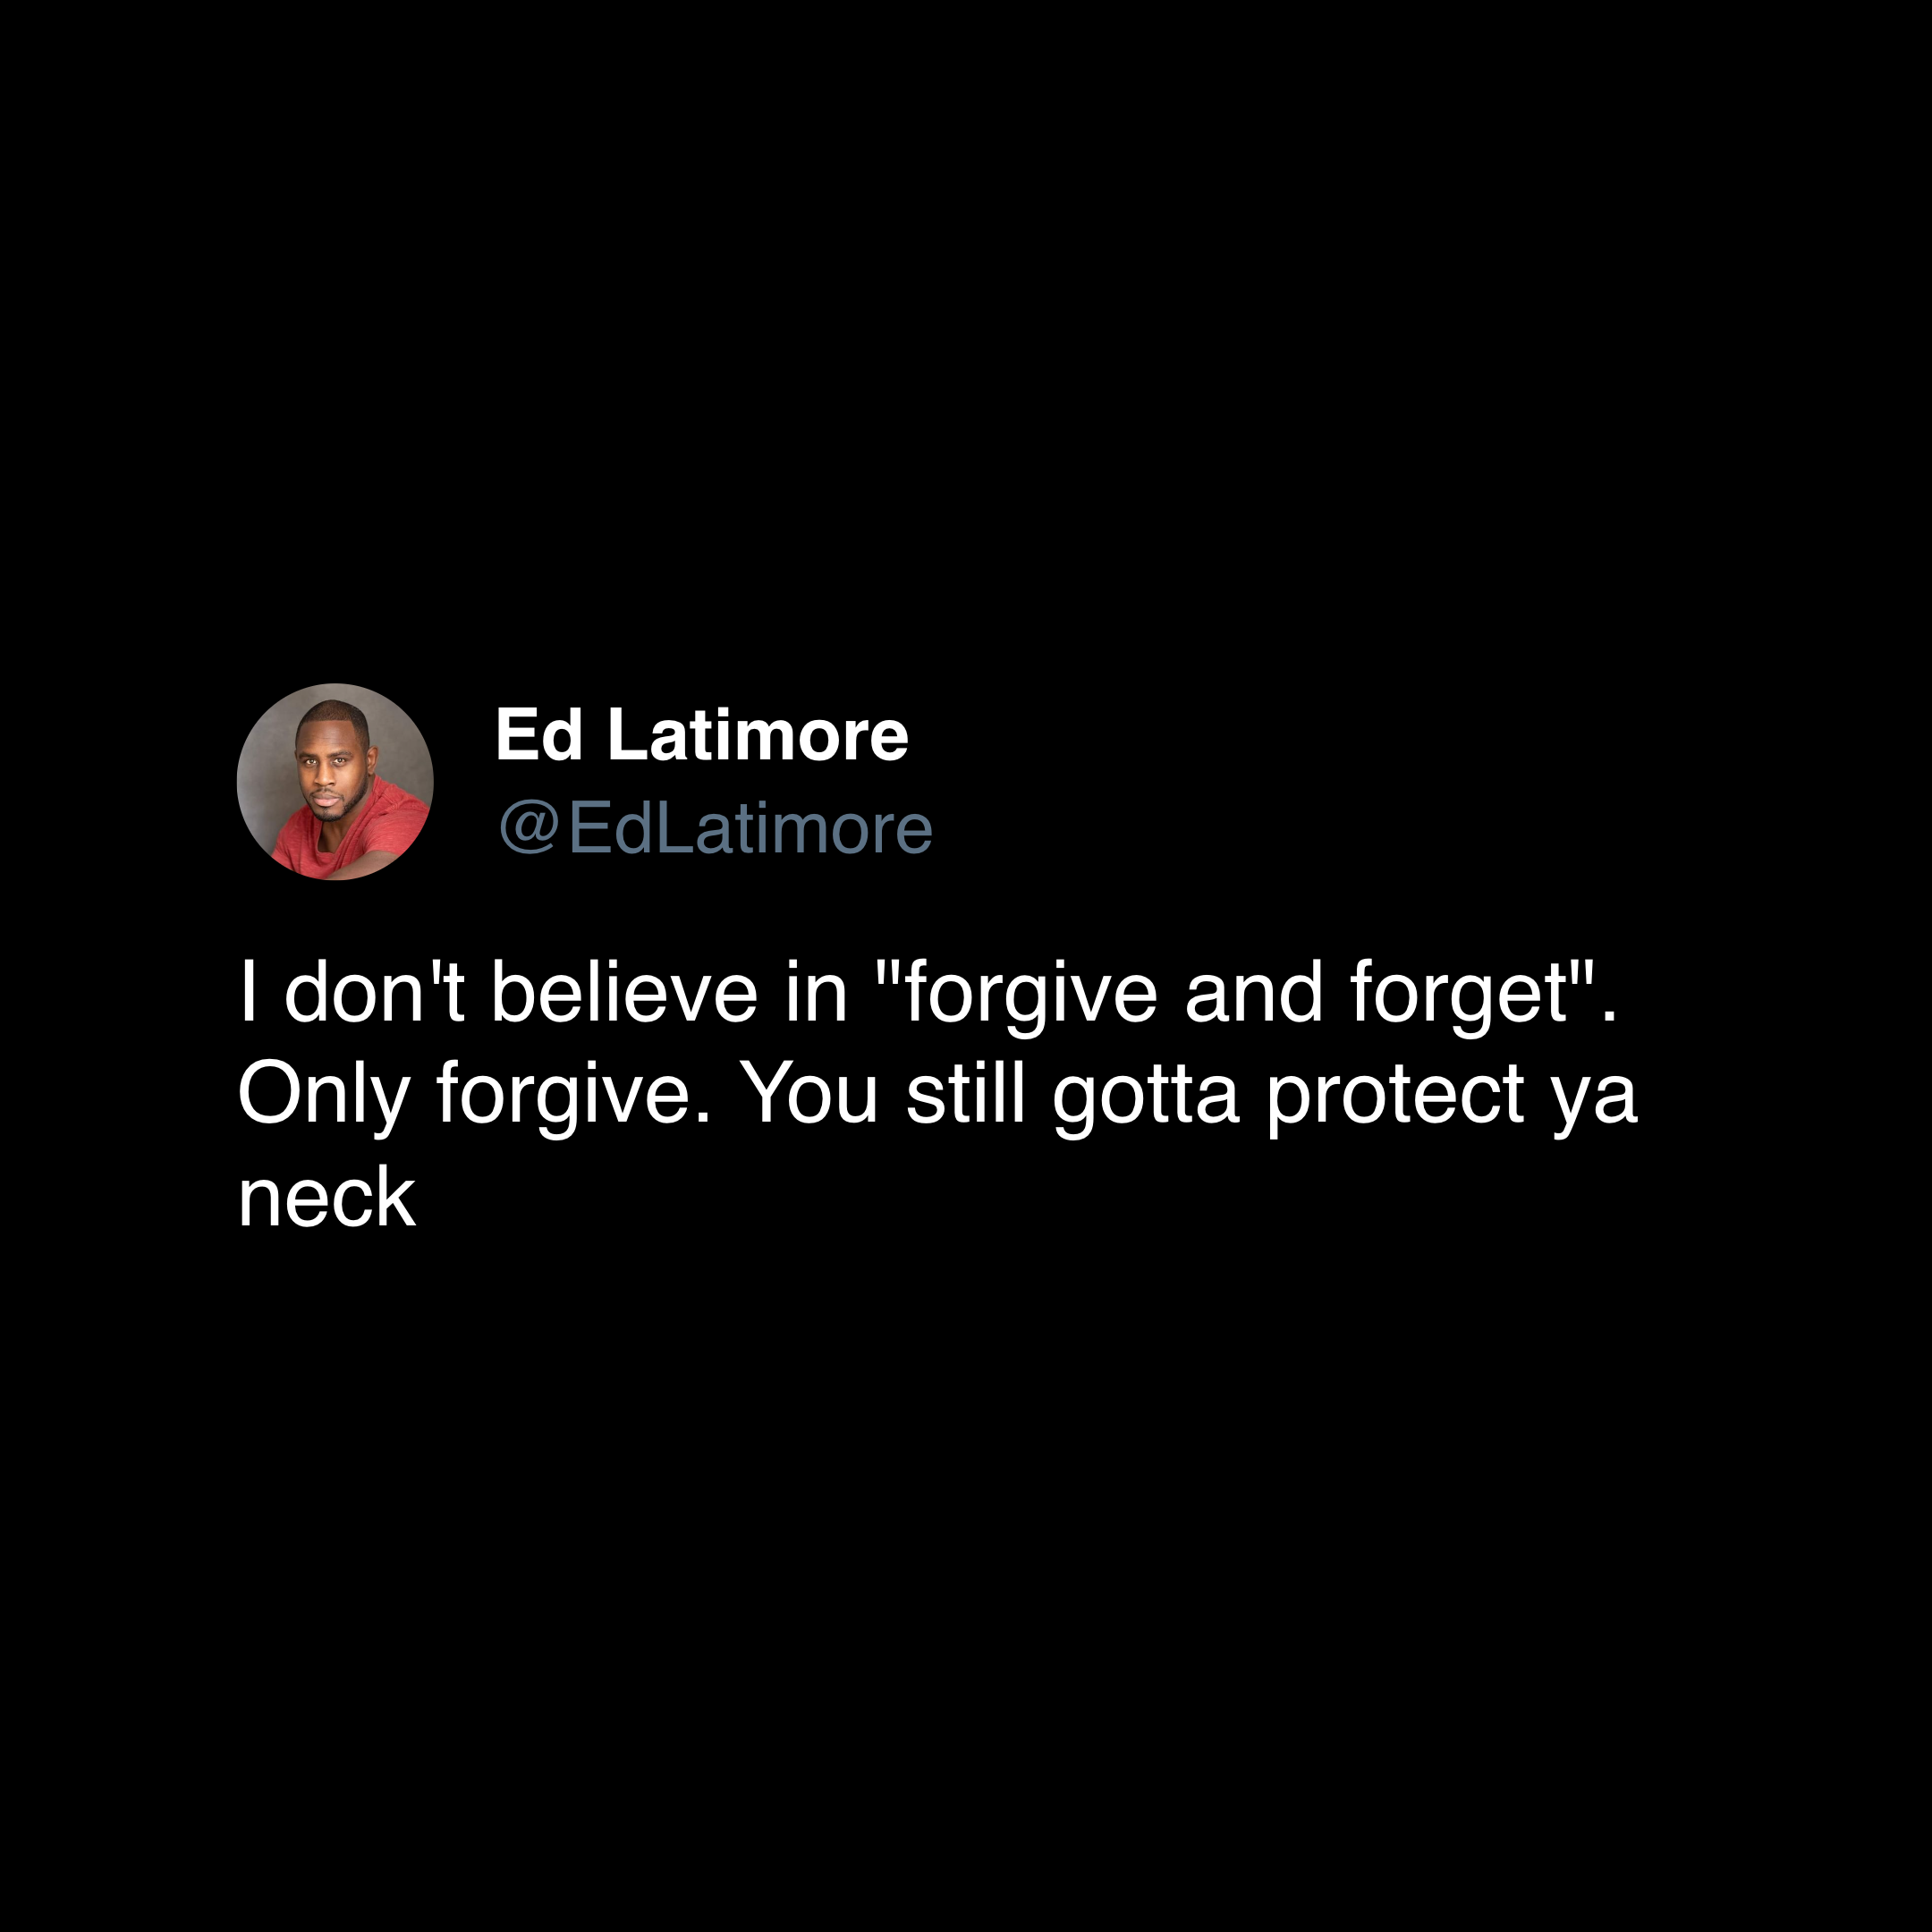 ed latimore forgiveness quotes "only forgive. never forget"